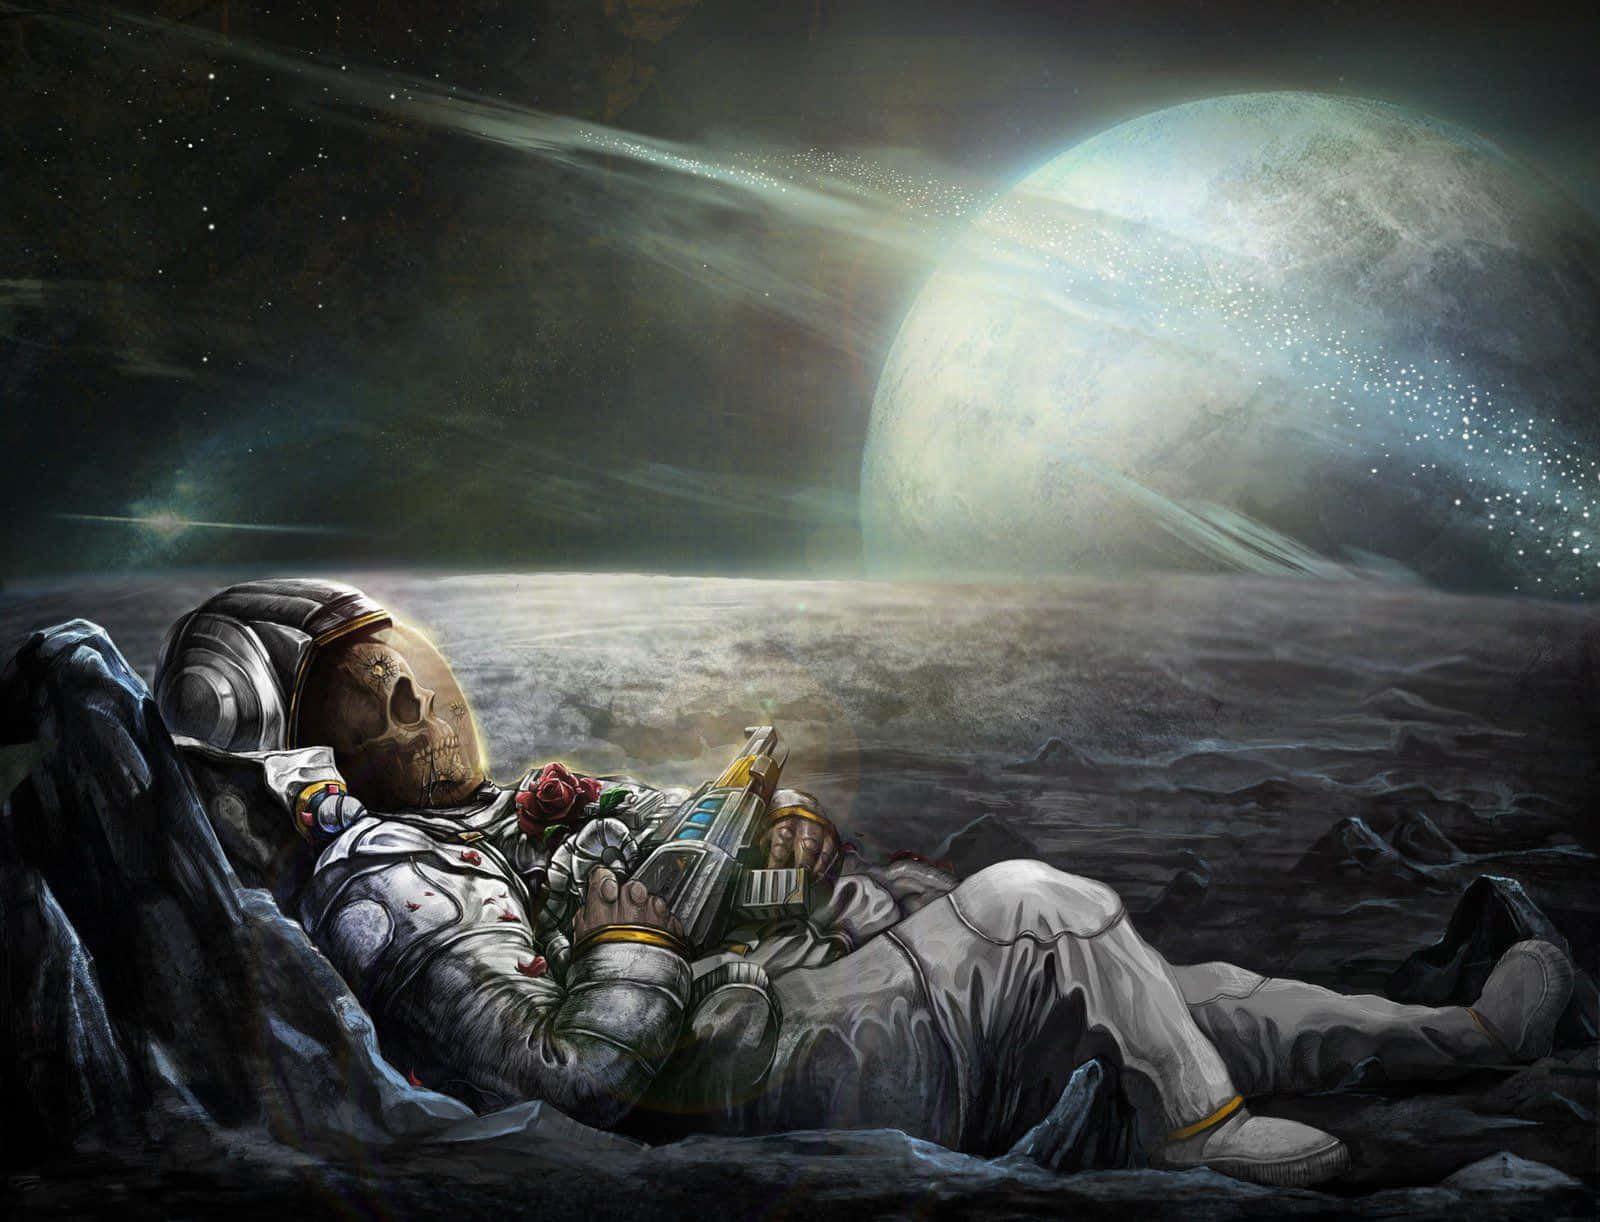 Astronaut admires the beauty of the universe Wallpaper